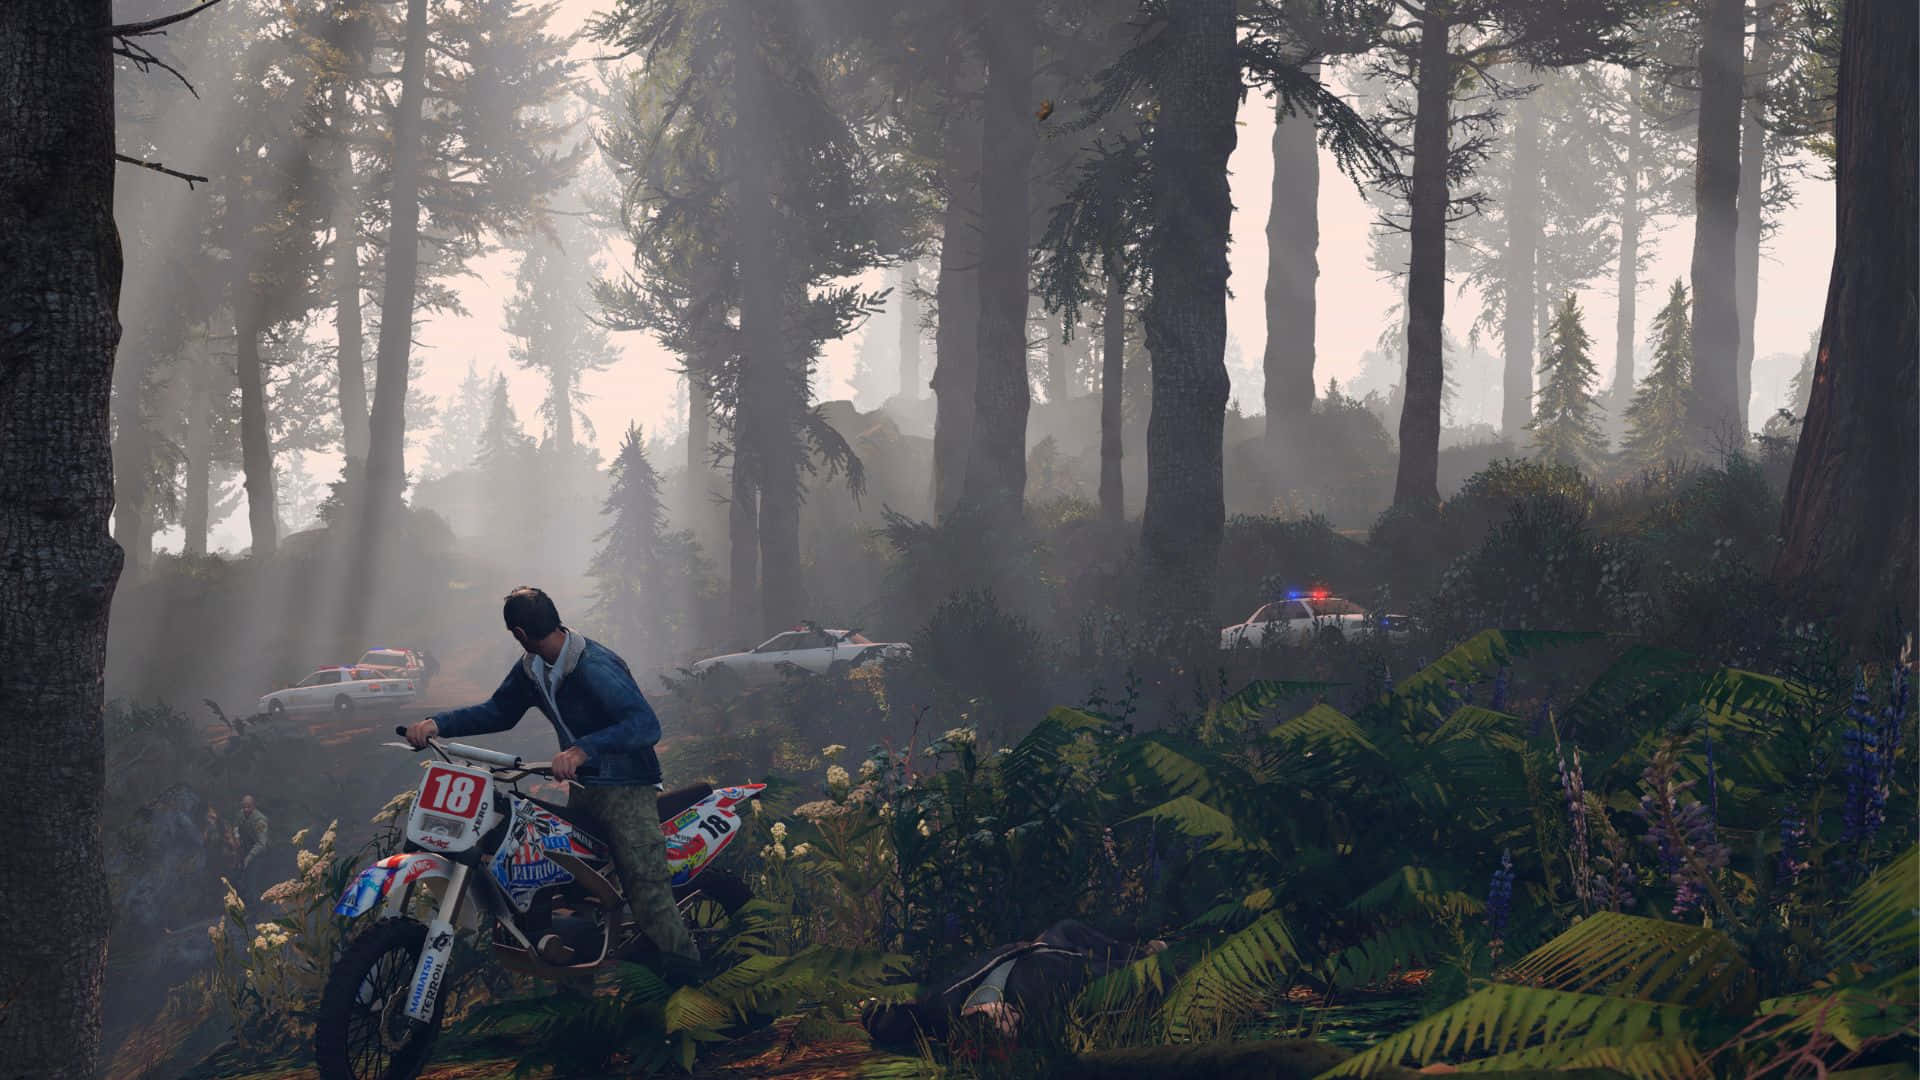 a man riding a motorcycle through the forest